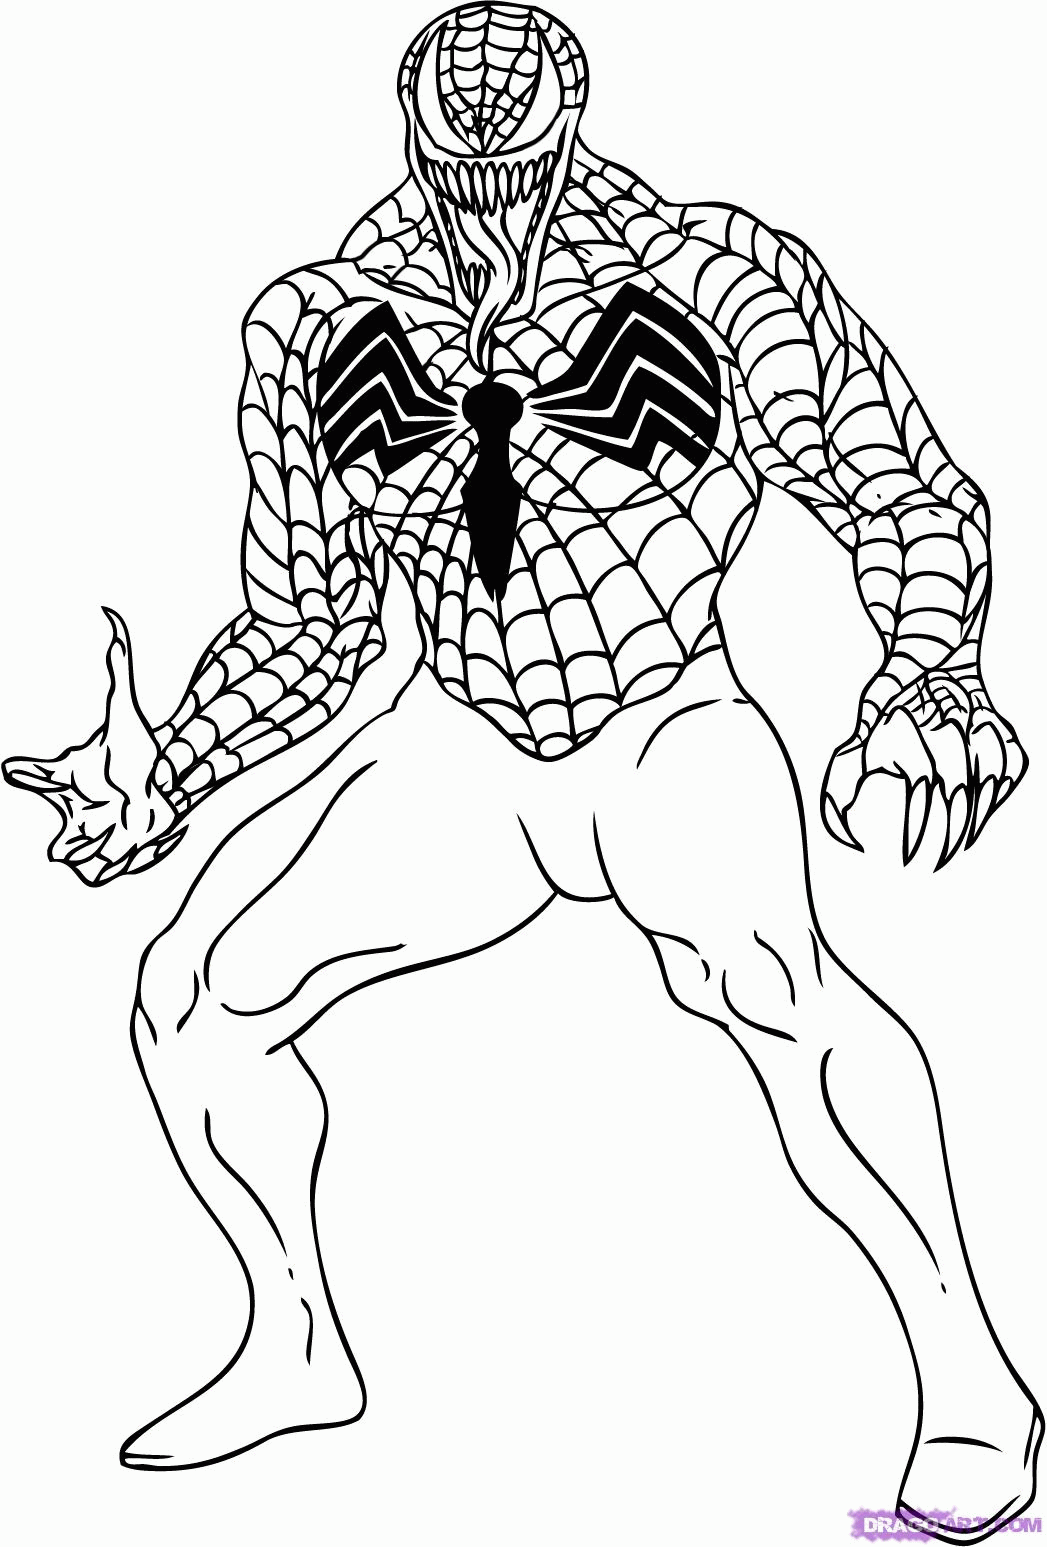 Printable Venom Coloring Pages - Coloring Home